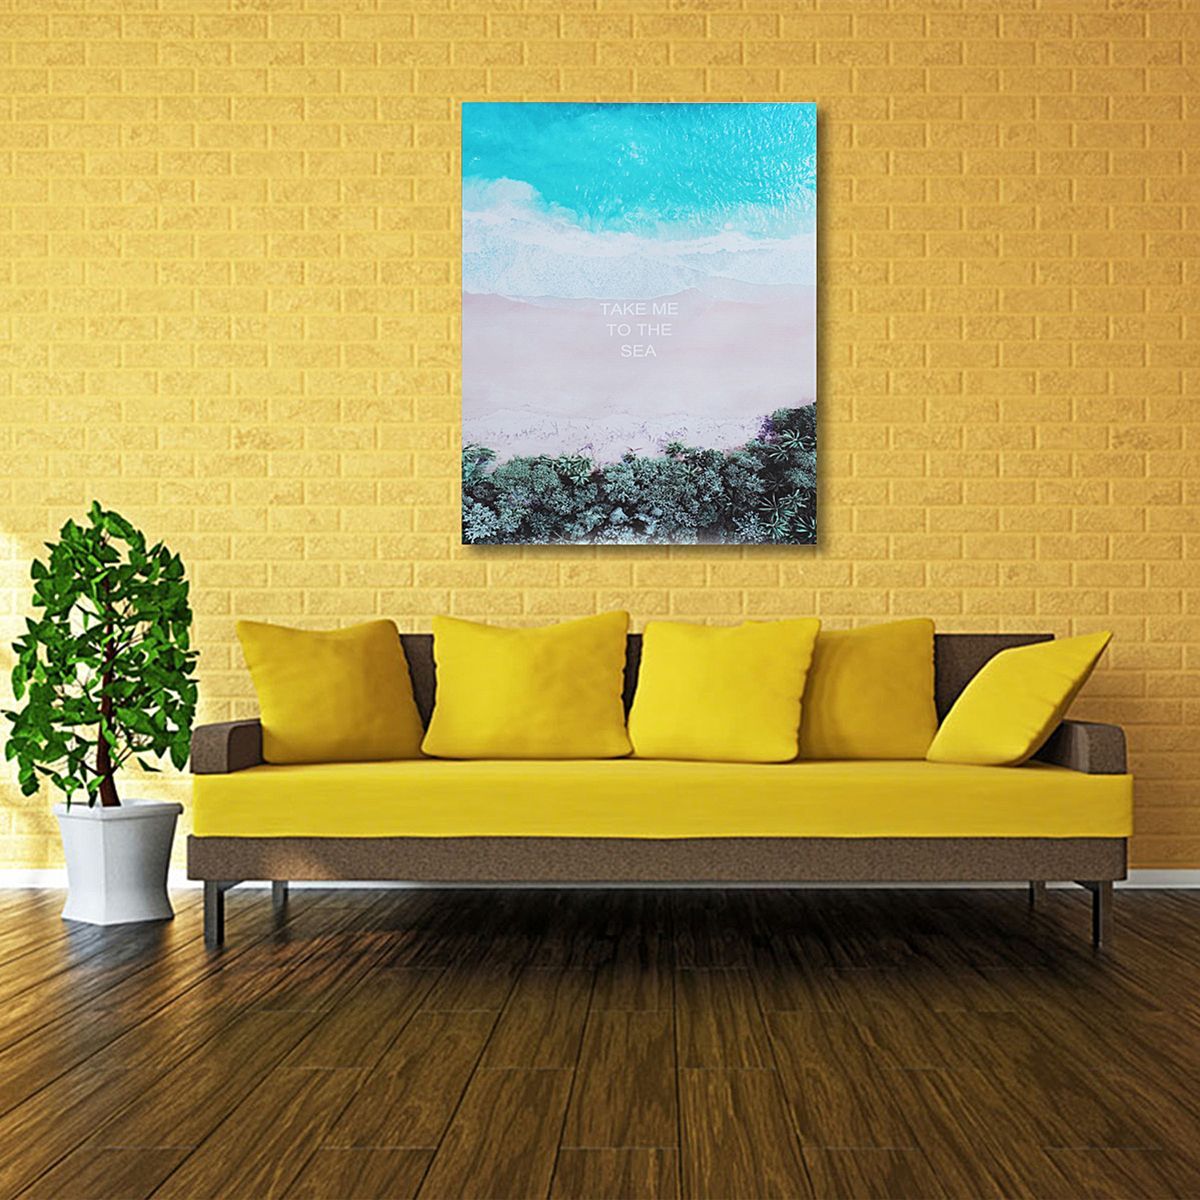 Unframed-Canvas-Print-Painting-Decor-Wall-Paper-Sticker-Bedroom-Home-Decorations-1450171